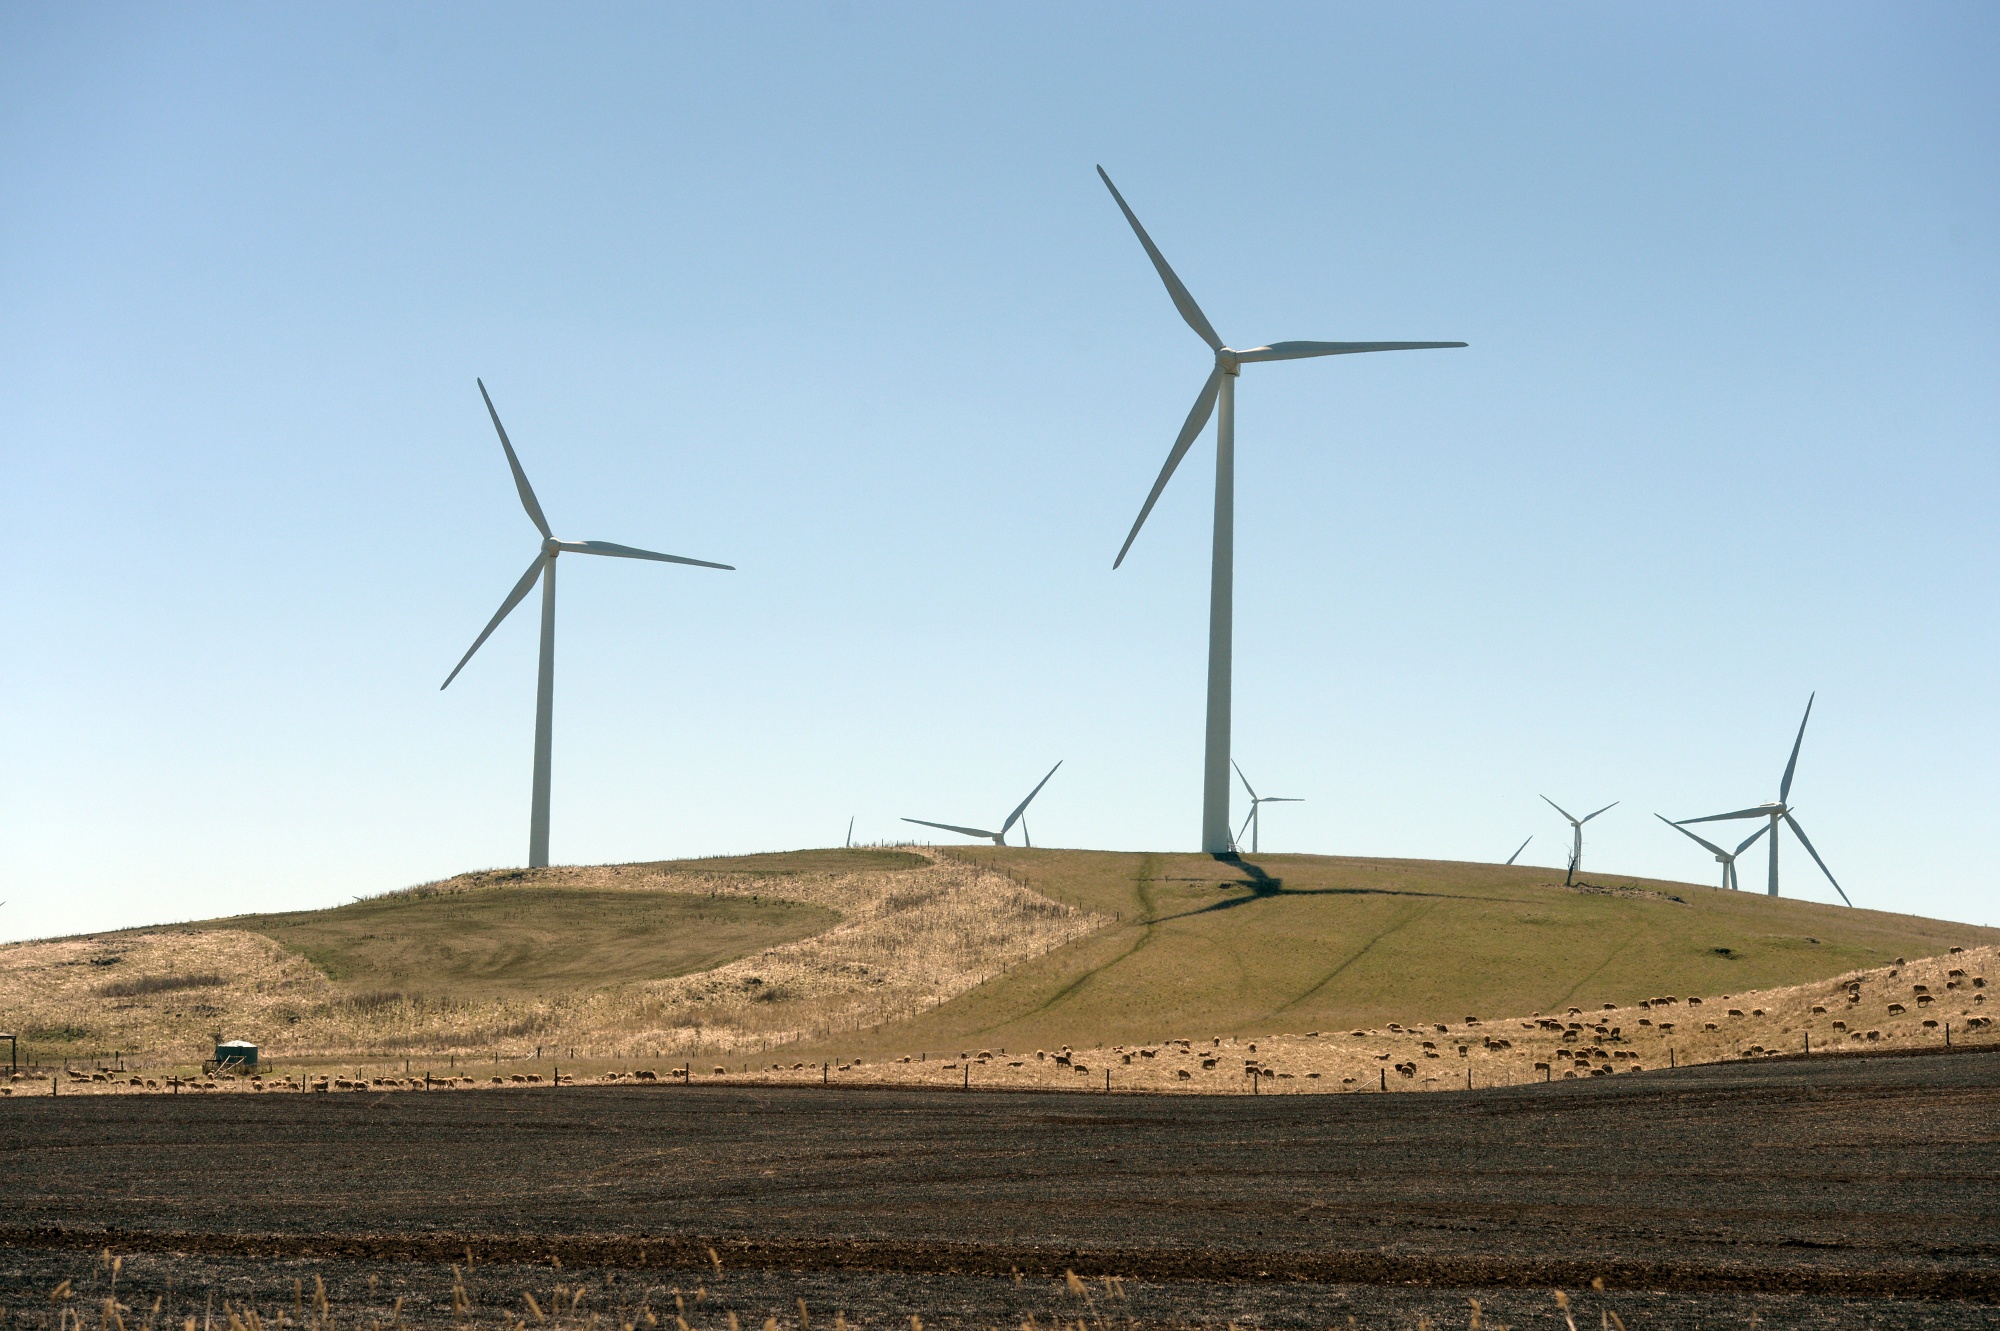 A wind farm in Waubra, Victoria, owned by Acciona Energia.